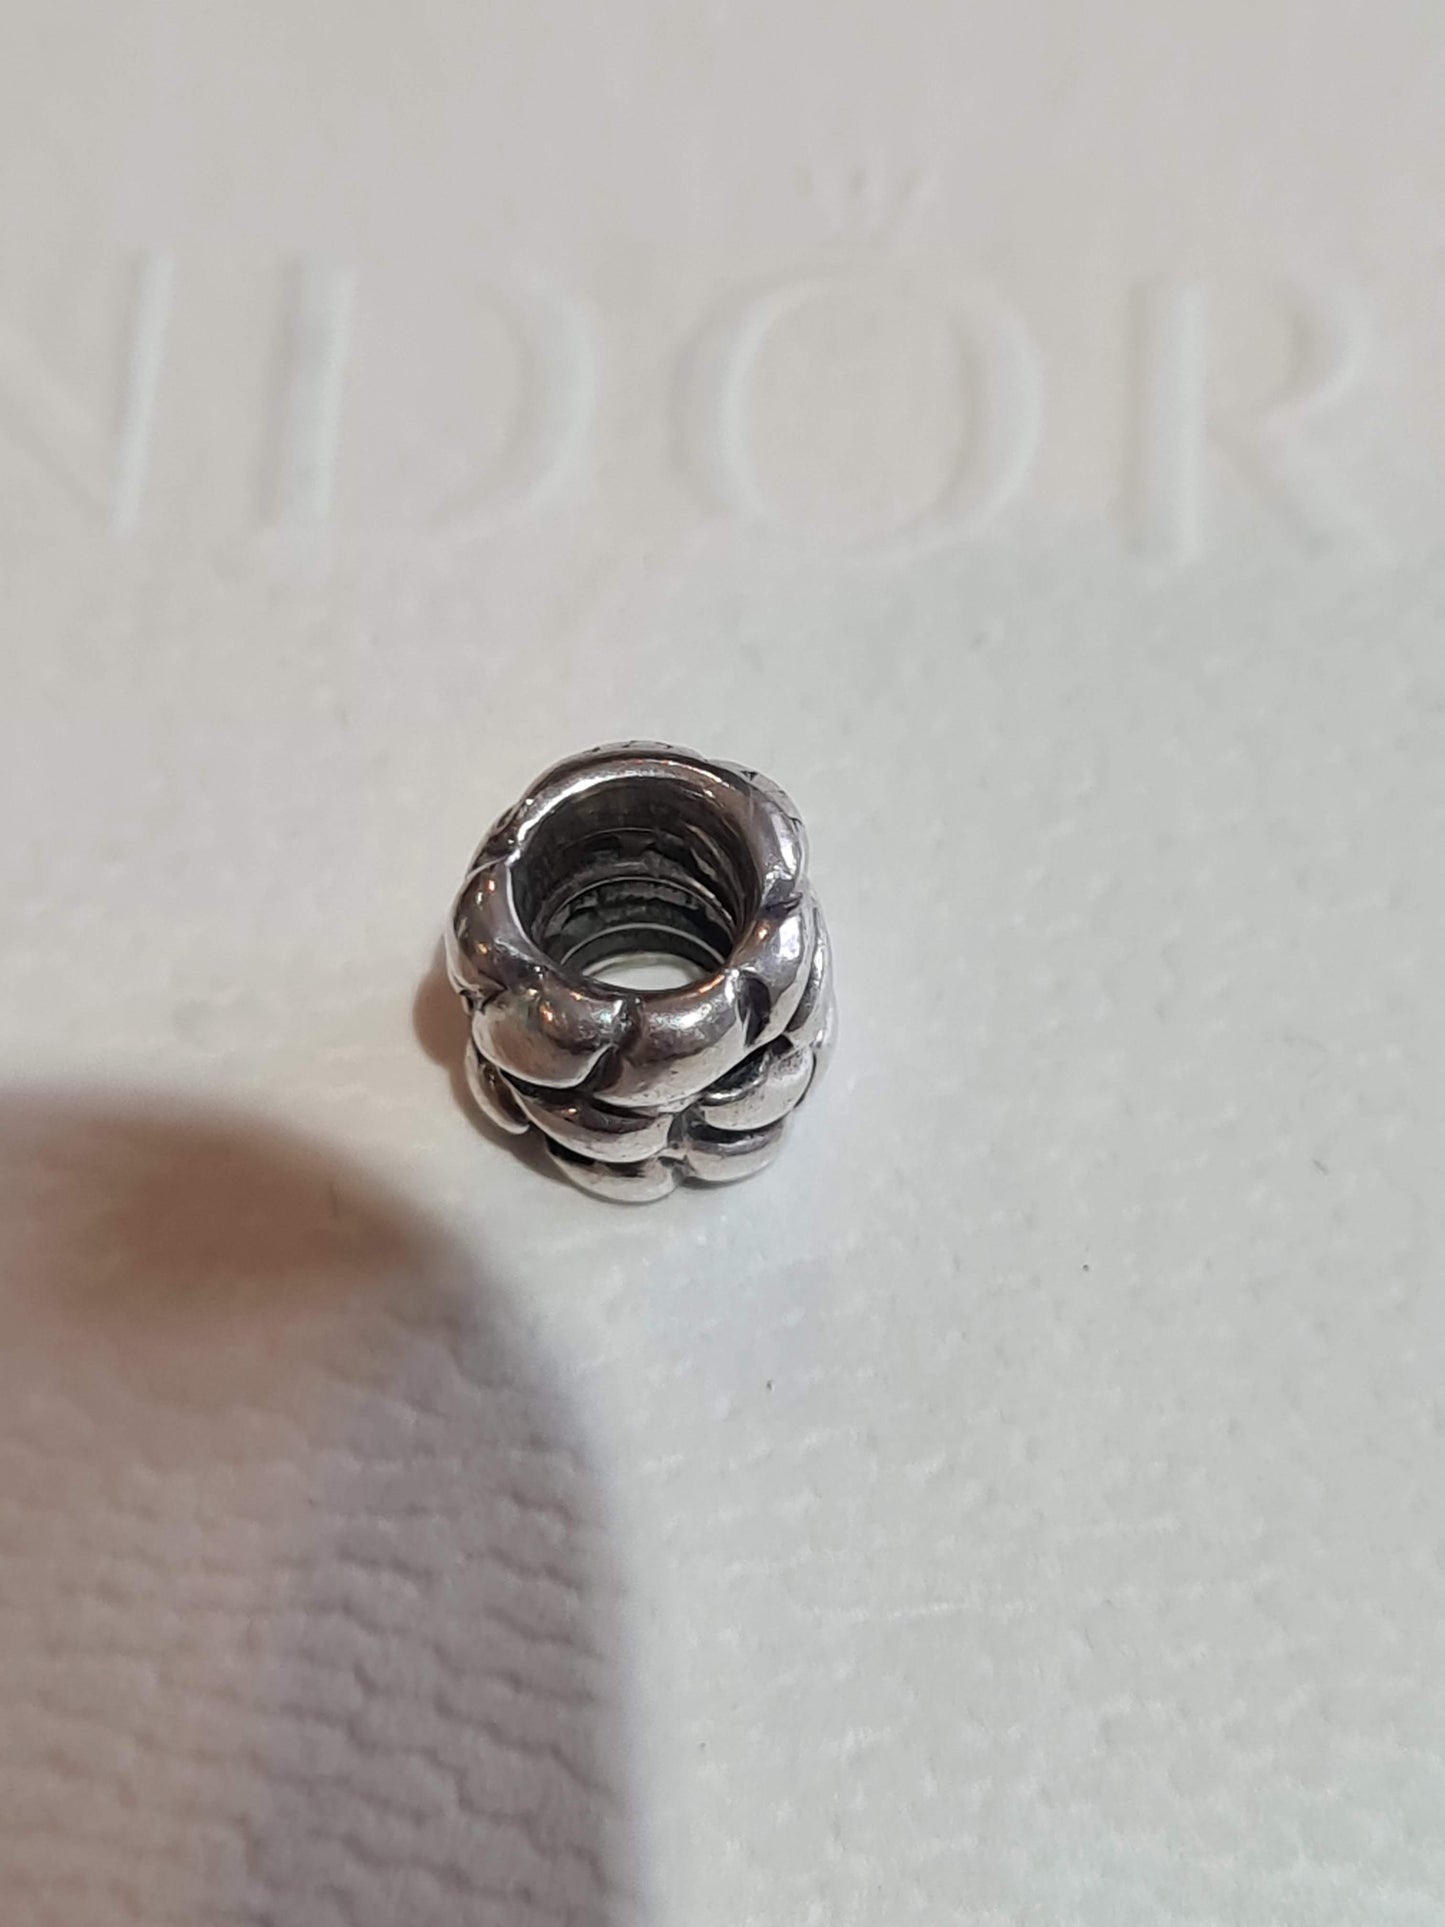 Genuine Pandora Woven Rope Charm With Small Holes Retired and Very Old